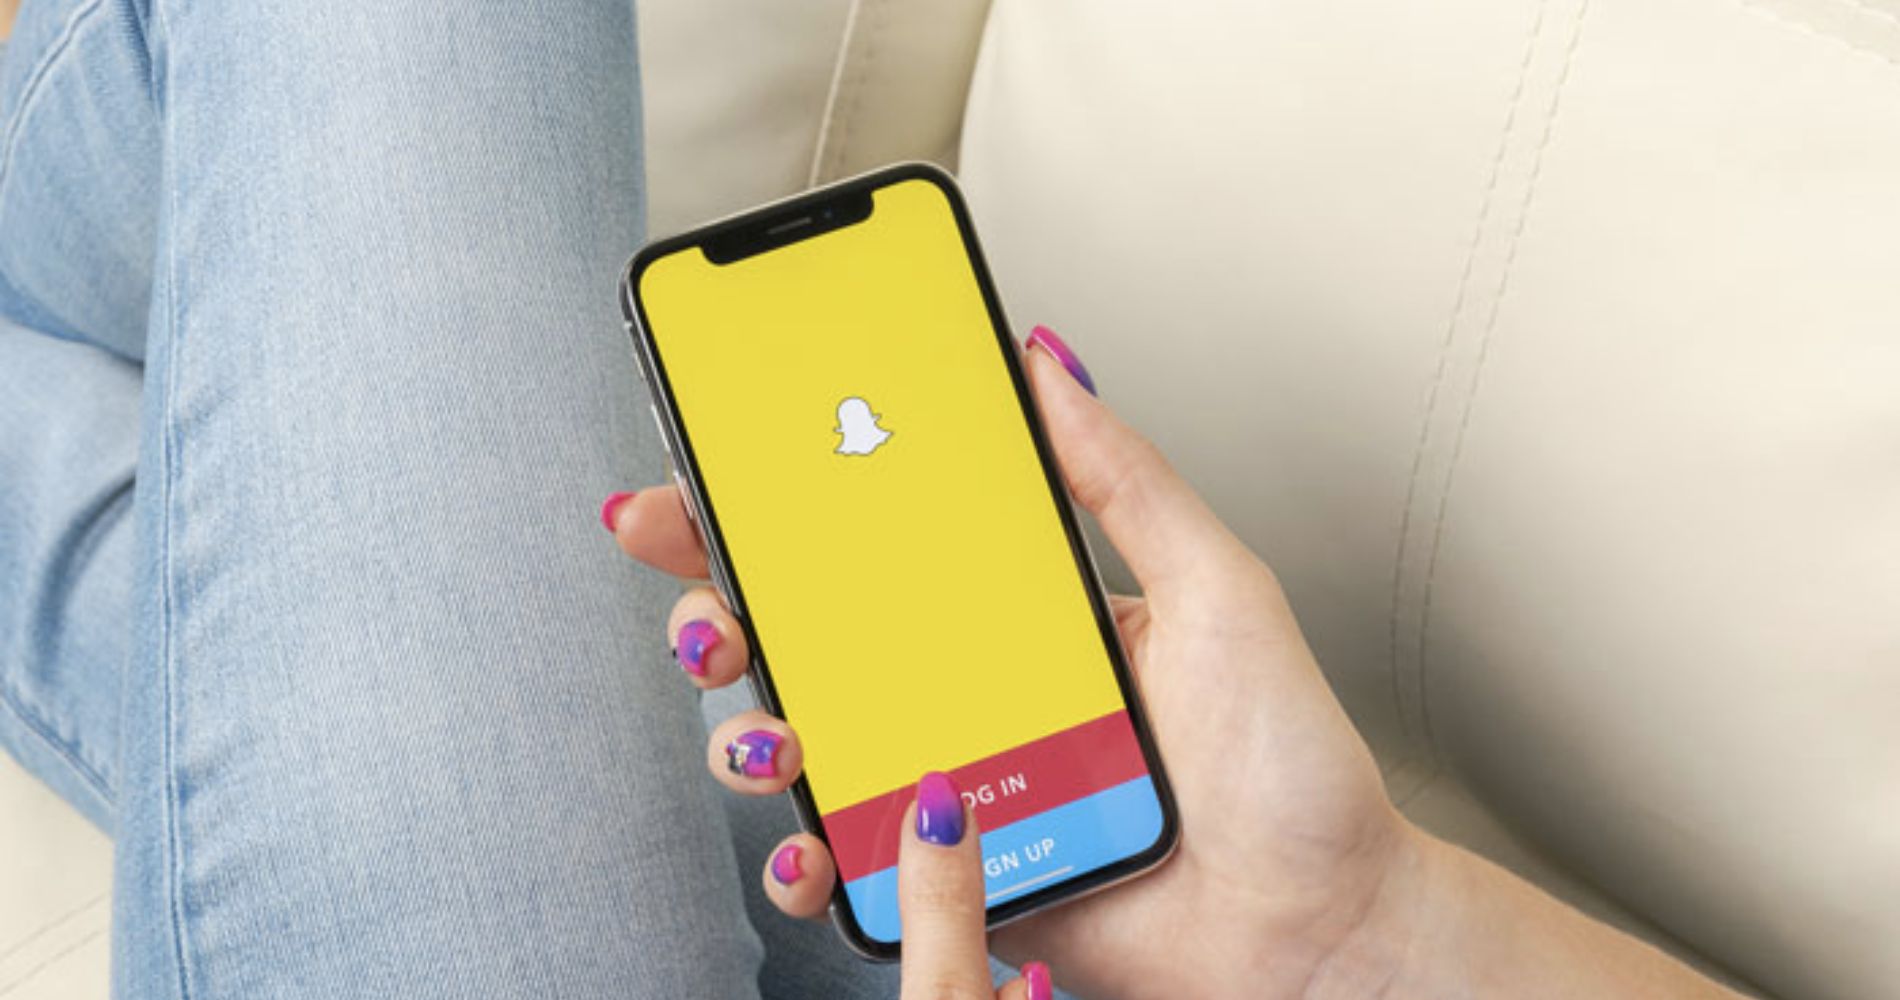 DistroKid teamed up with Snapchat will pay monthly to independent artists-MBW